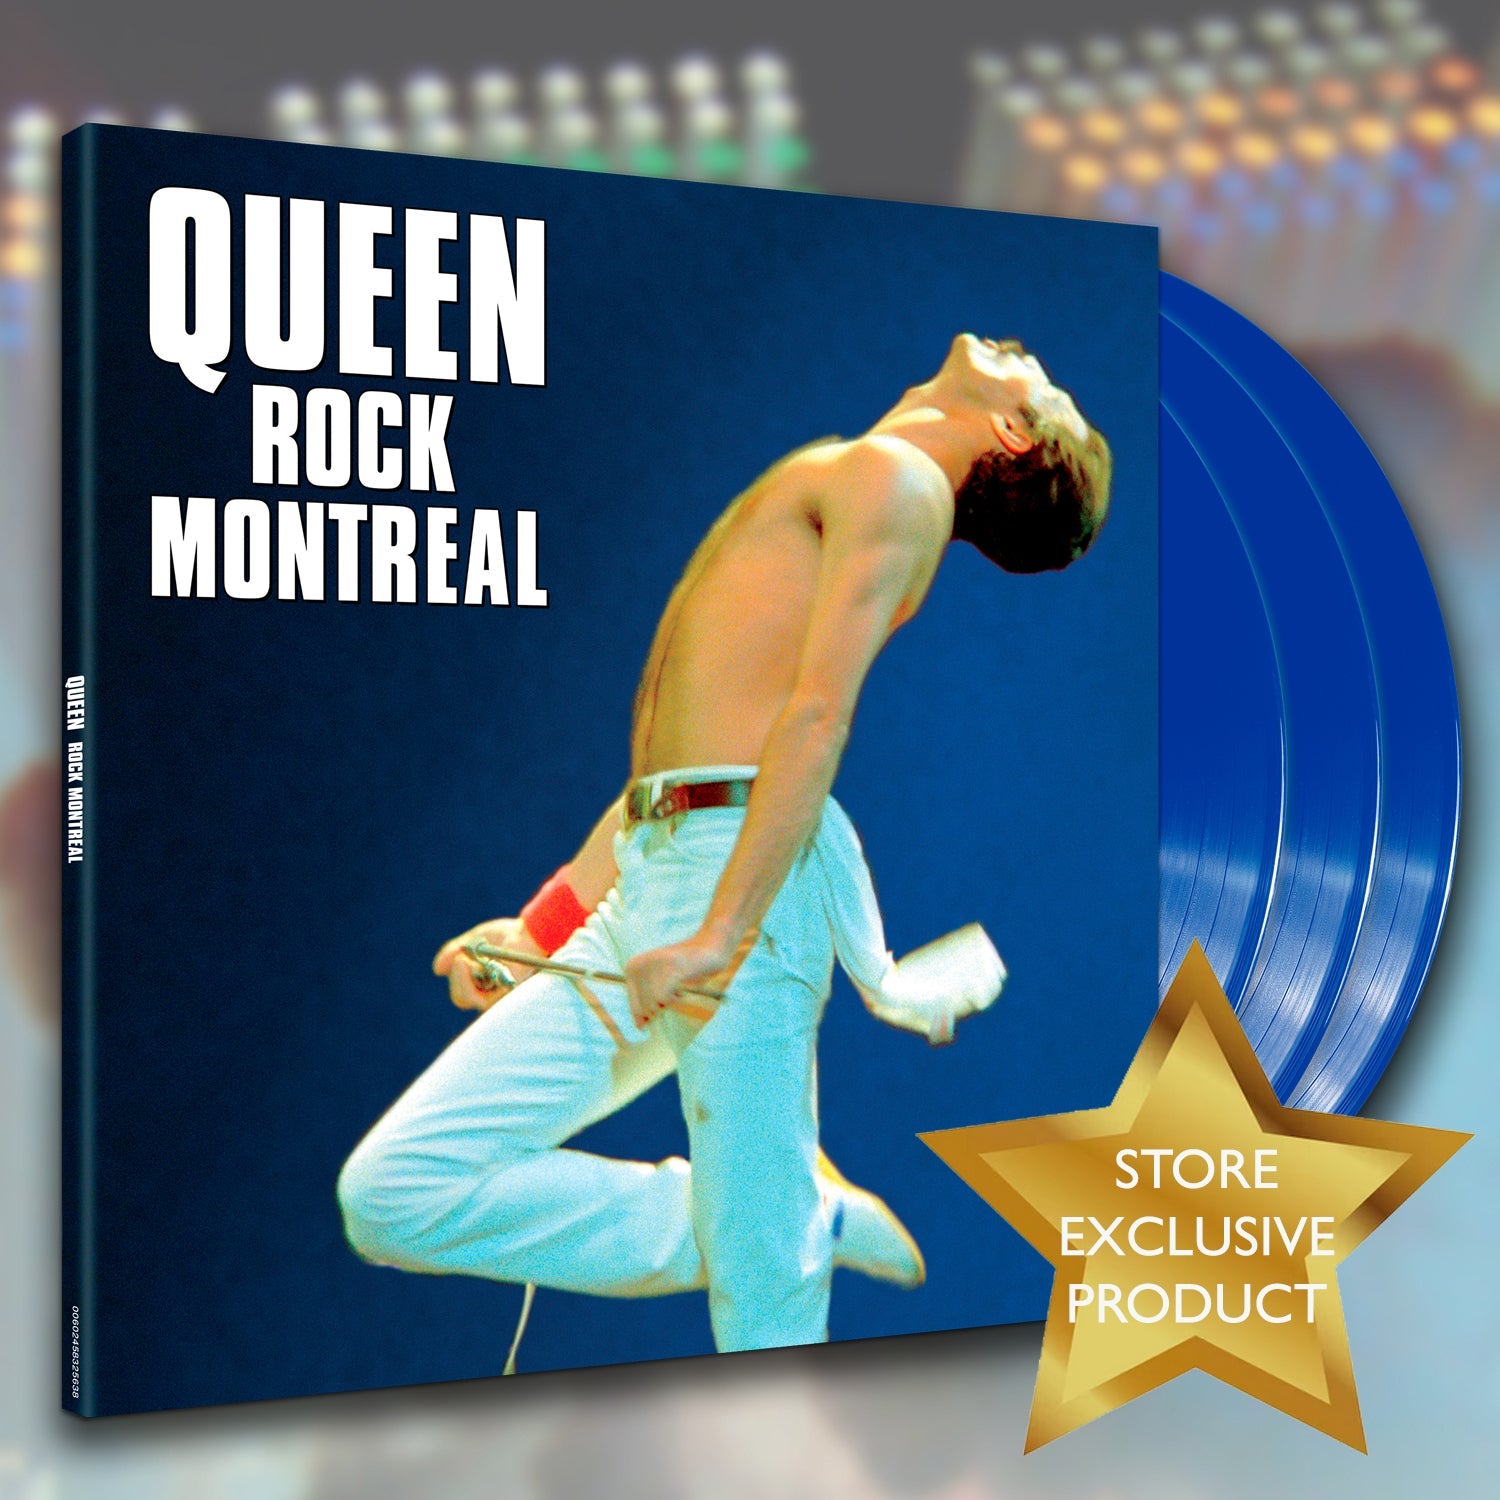 Rock Montreal 4K Ultra HD Edition, Double CD & Coloured Vinyl.